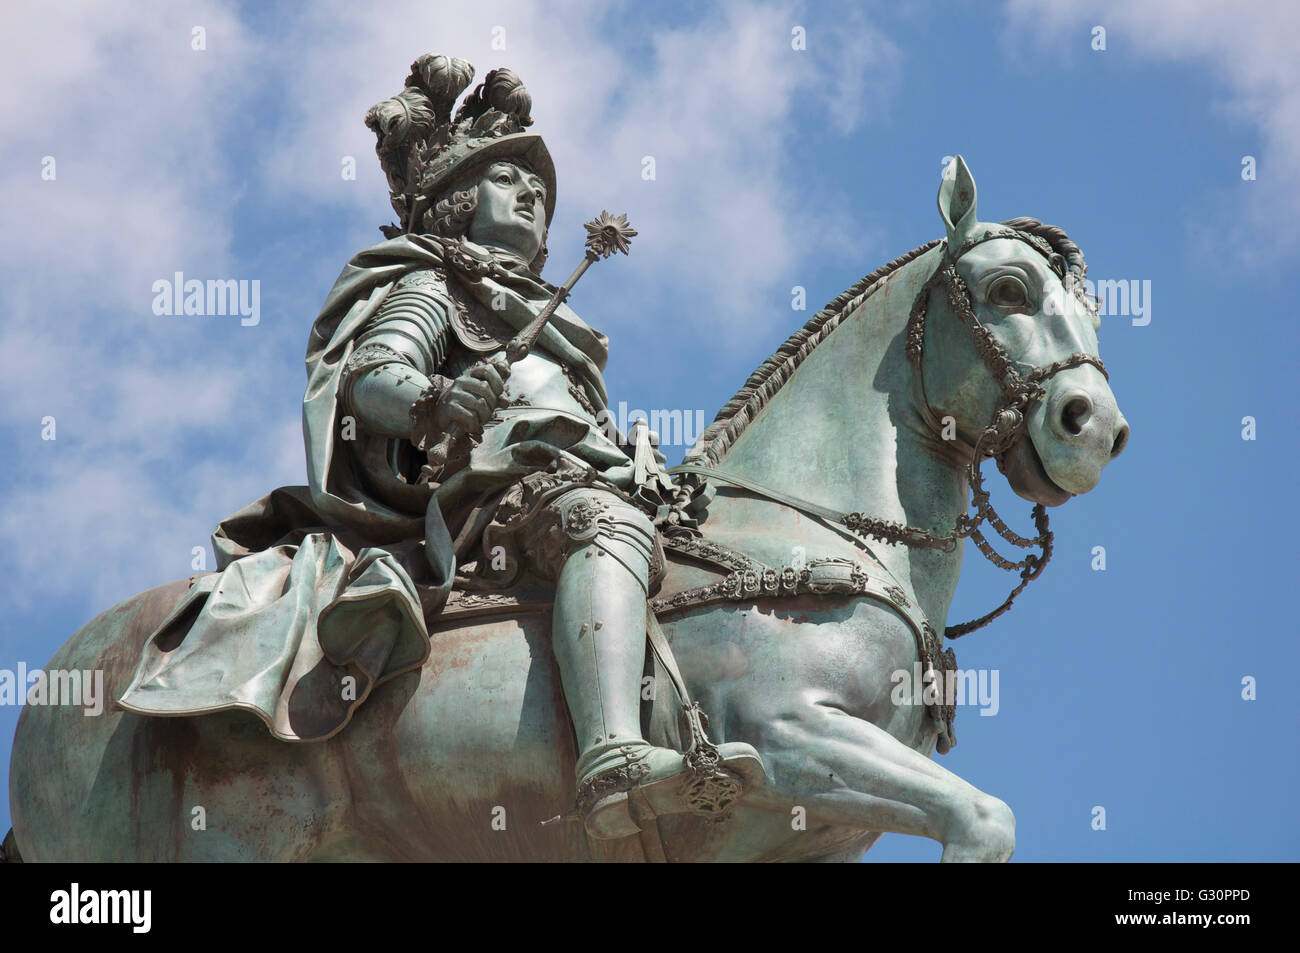 Portuguese monarchy. Looking up at the great bronze equestrian statue of Jóse 1st. King of Portugal from 1750 until 1777. Praça do Comércio, Lisbon. Stock Photo